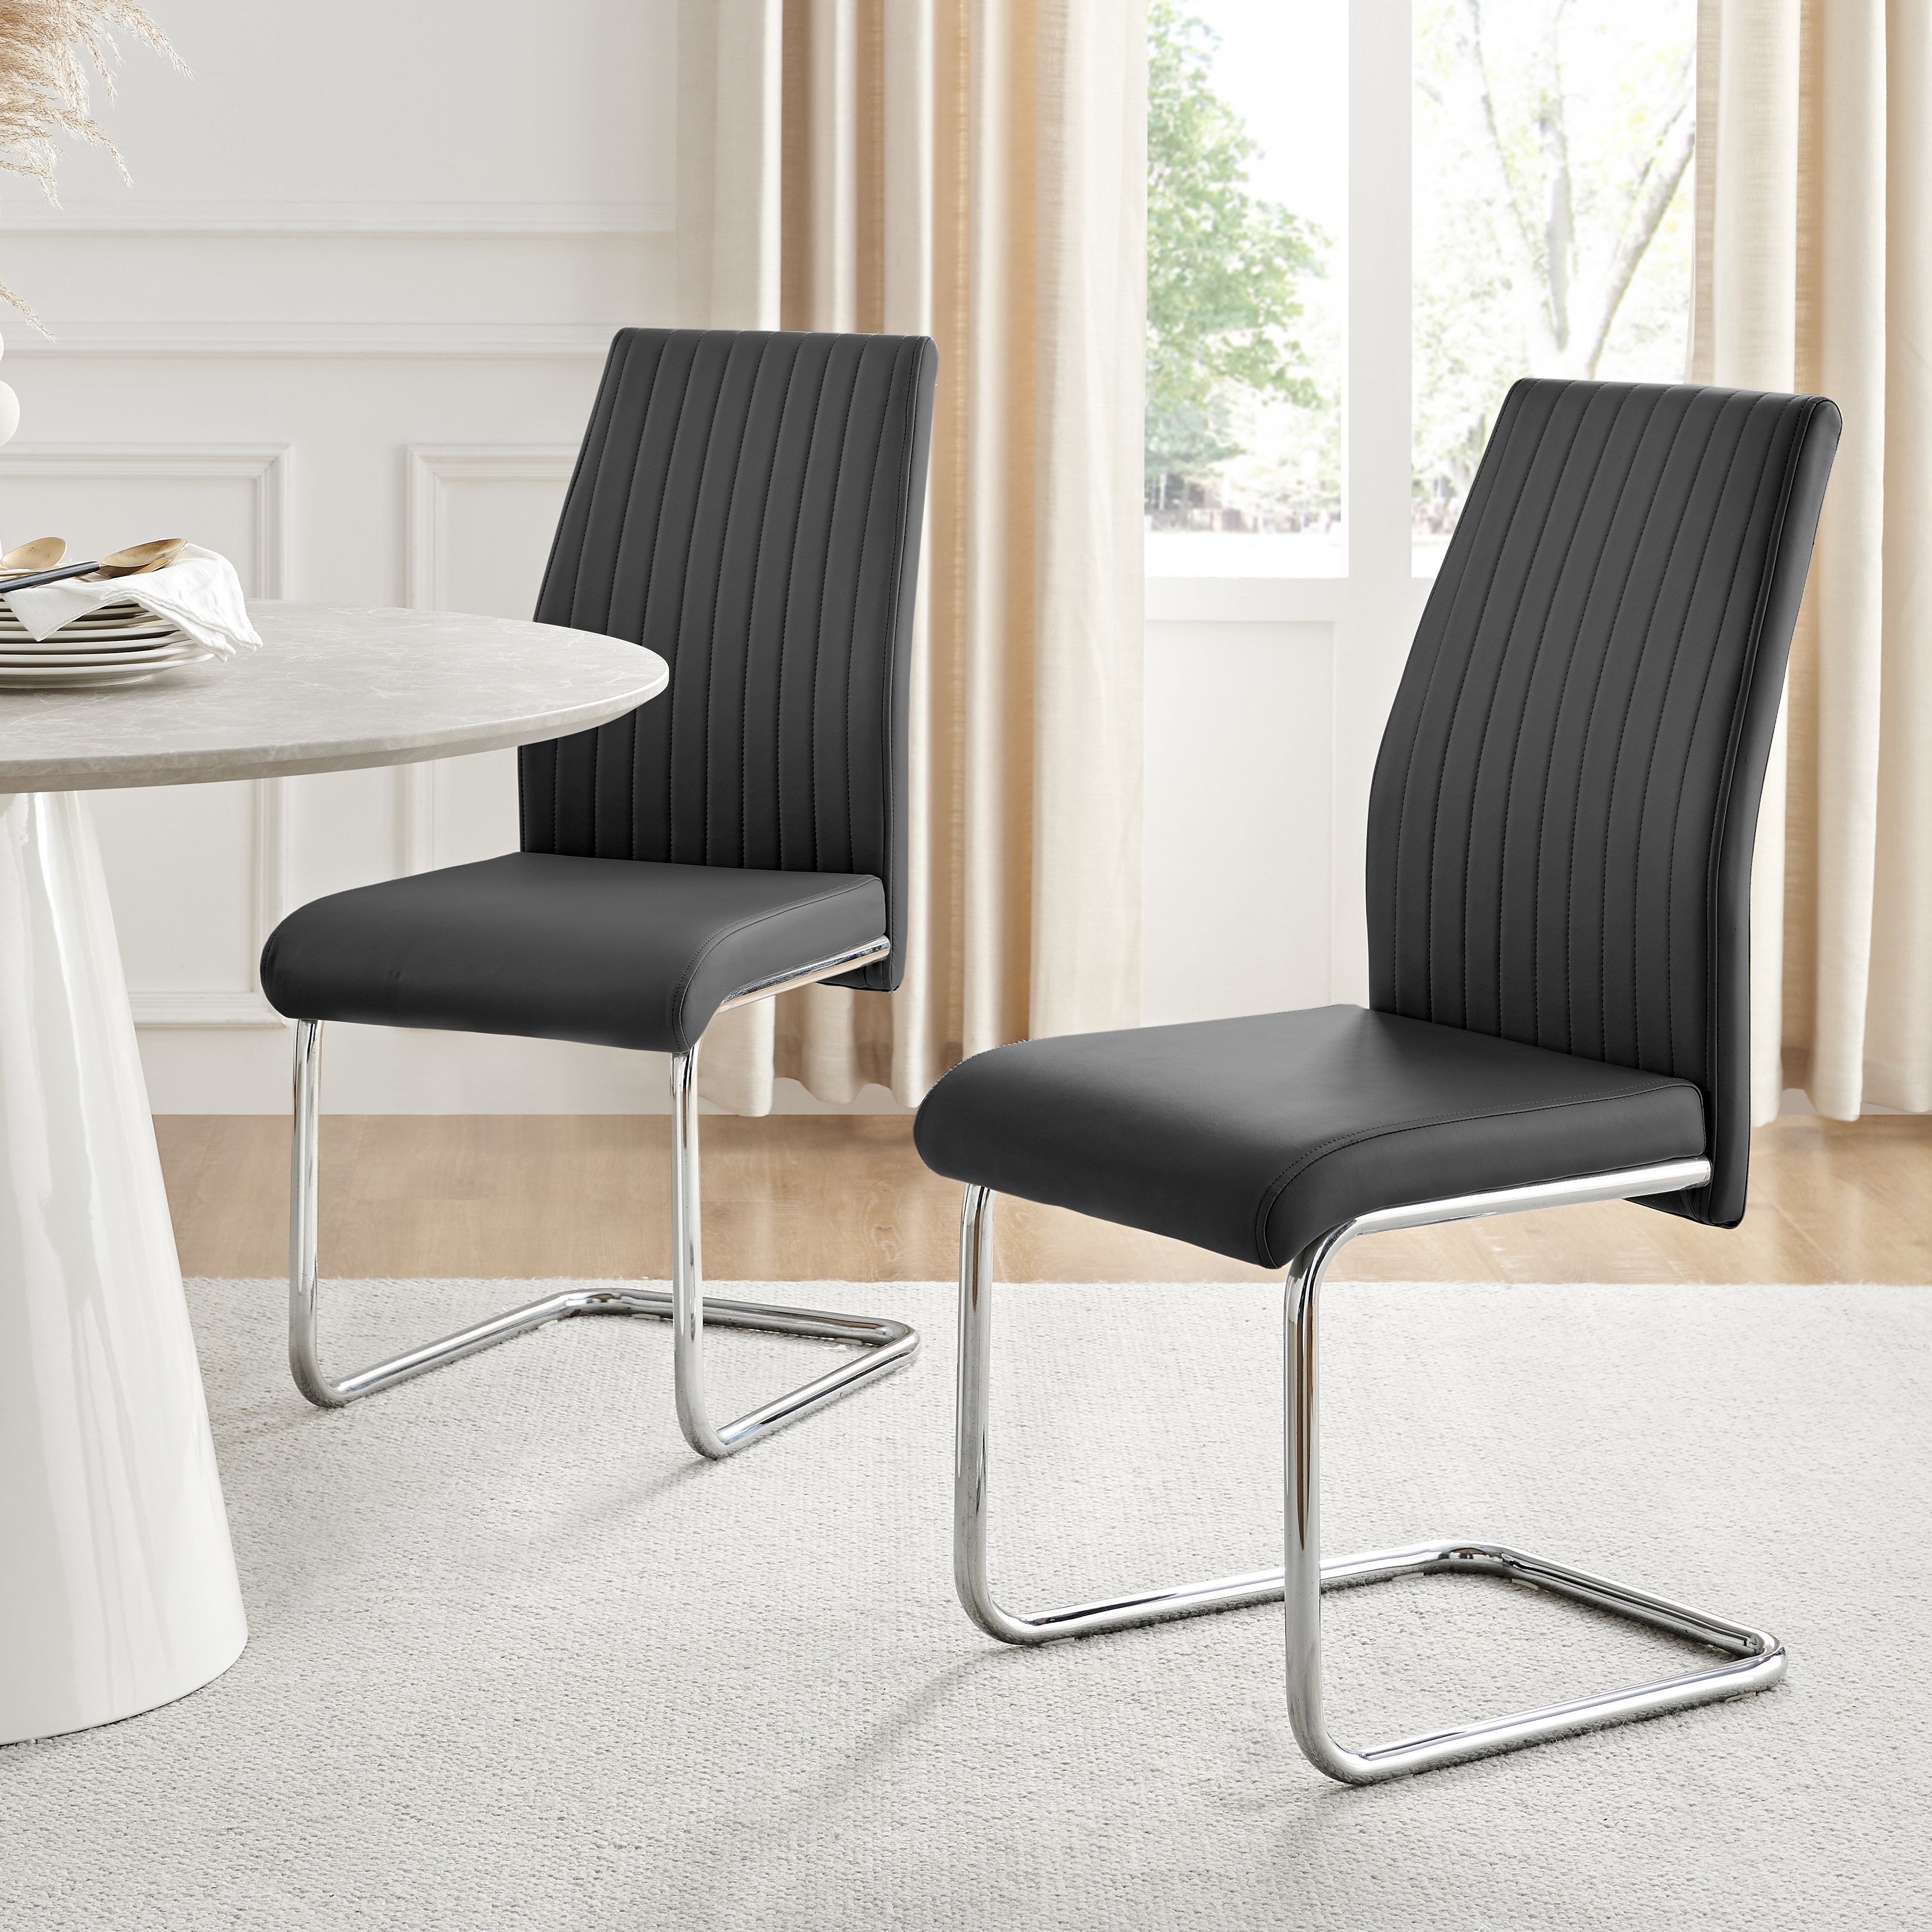 Lazarus Modern Padded Faux Leather & Chrome Leg Kitchen Dining Chairs  Modern Design